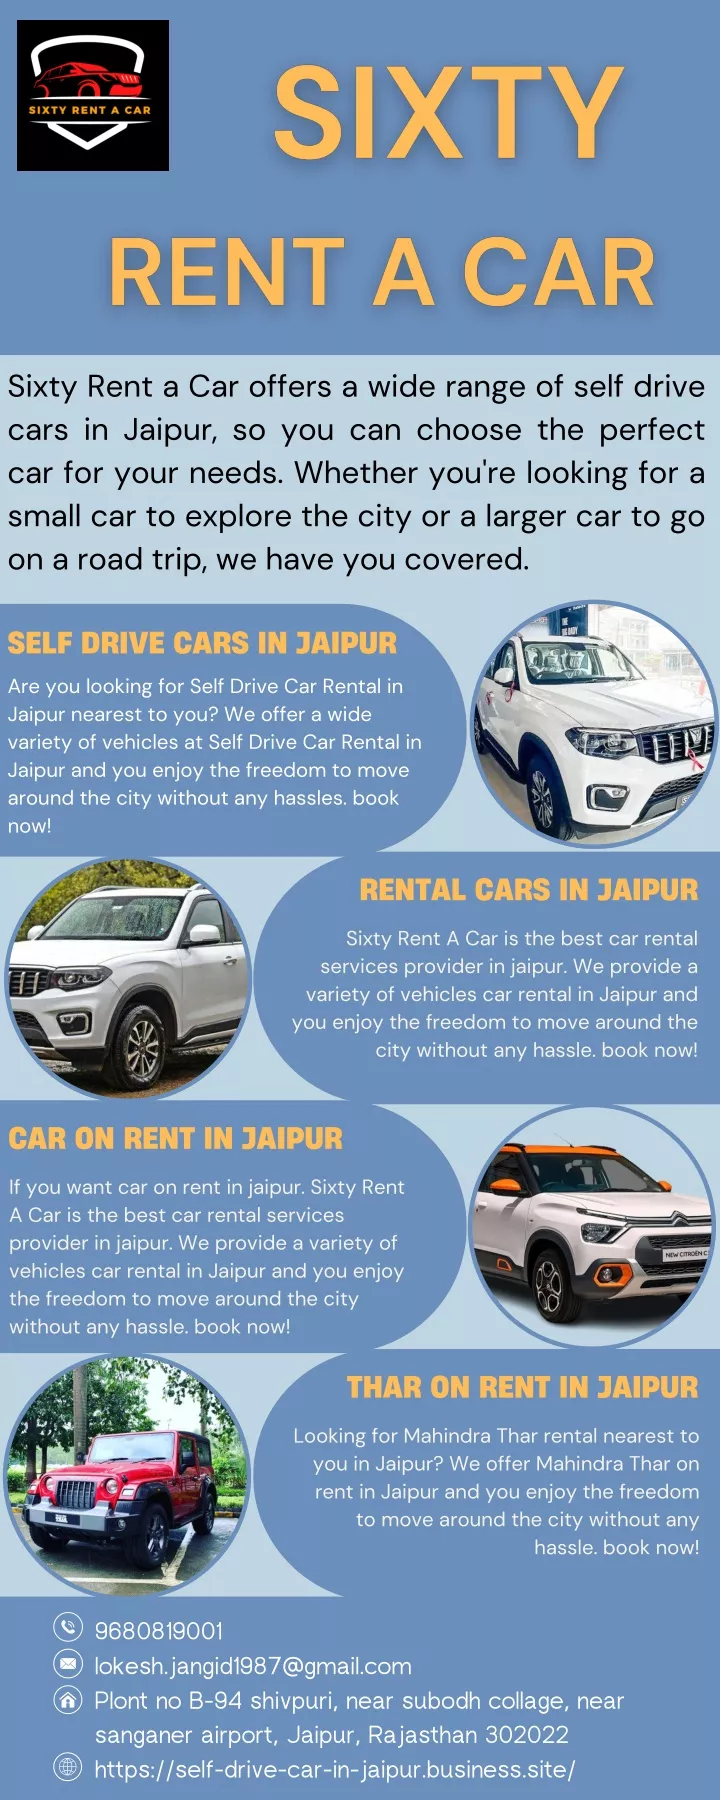 sixty rent a car offers a wide range of self